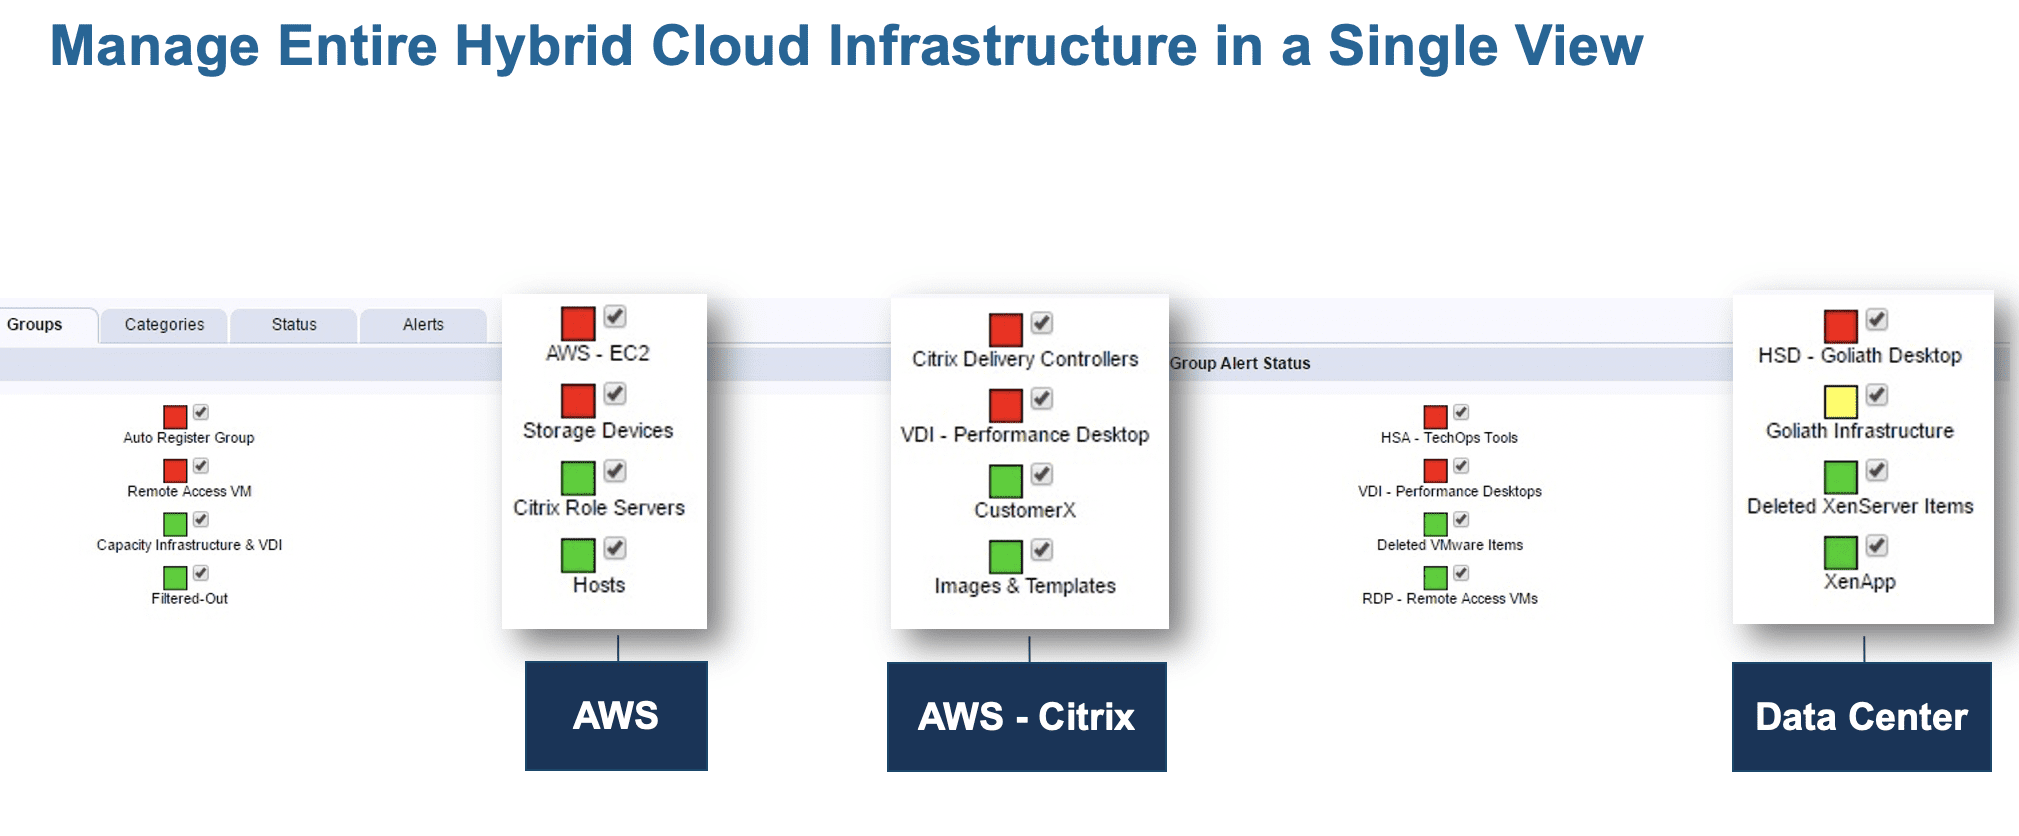 Manage entire hybrid cloud infrastructure in a single view screenshot